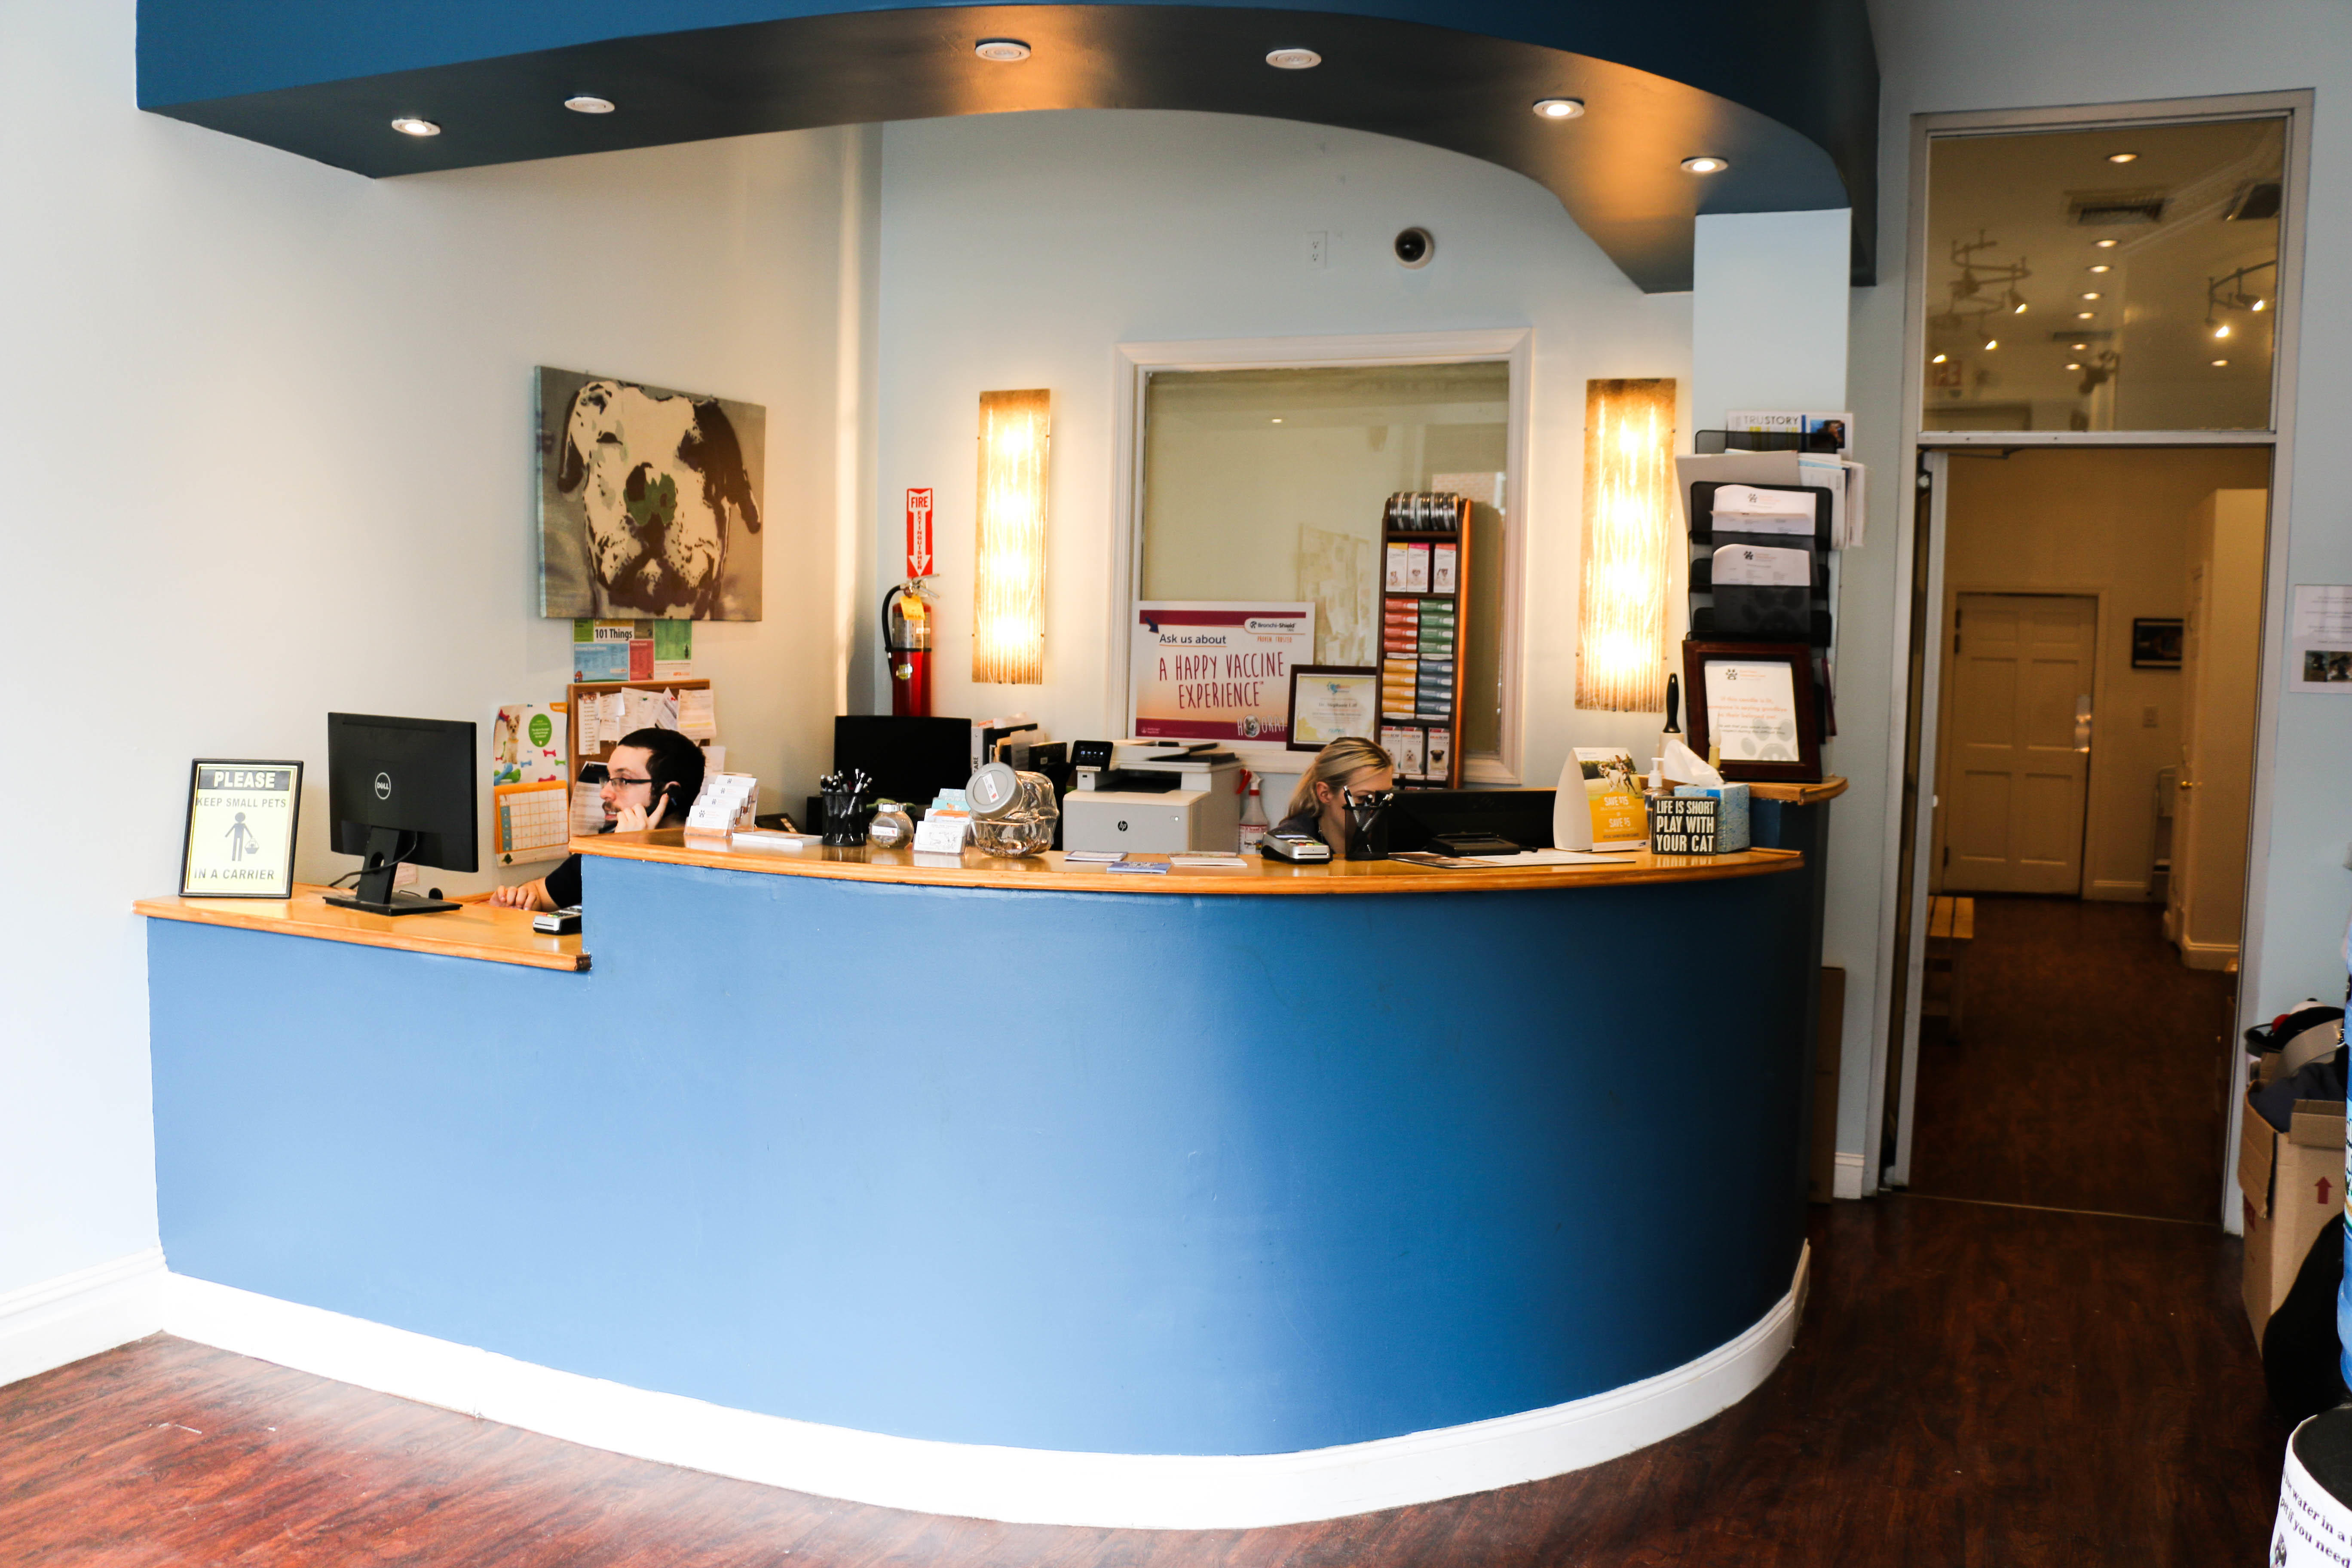 From check-in to check-out, our front office team is warm, friendly, and attentive.